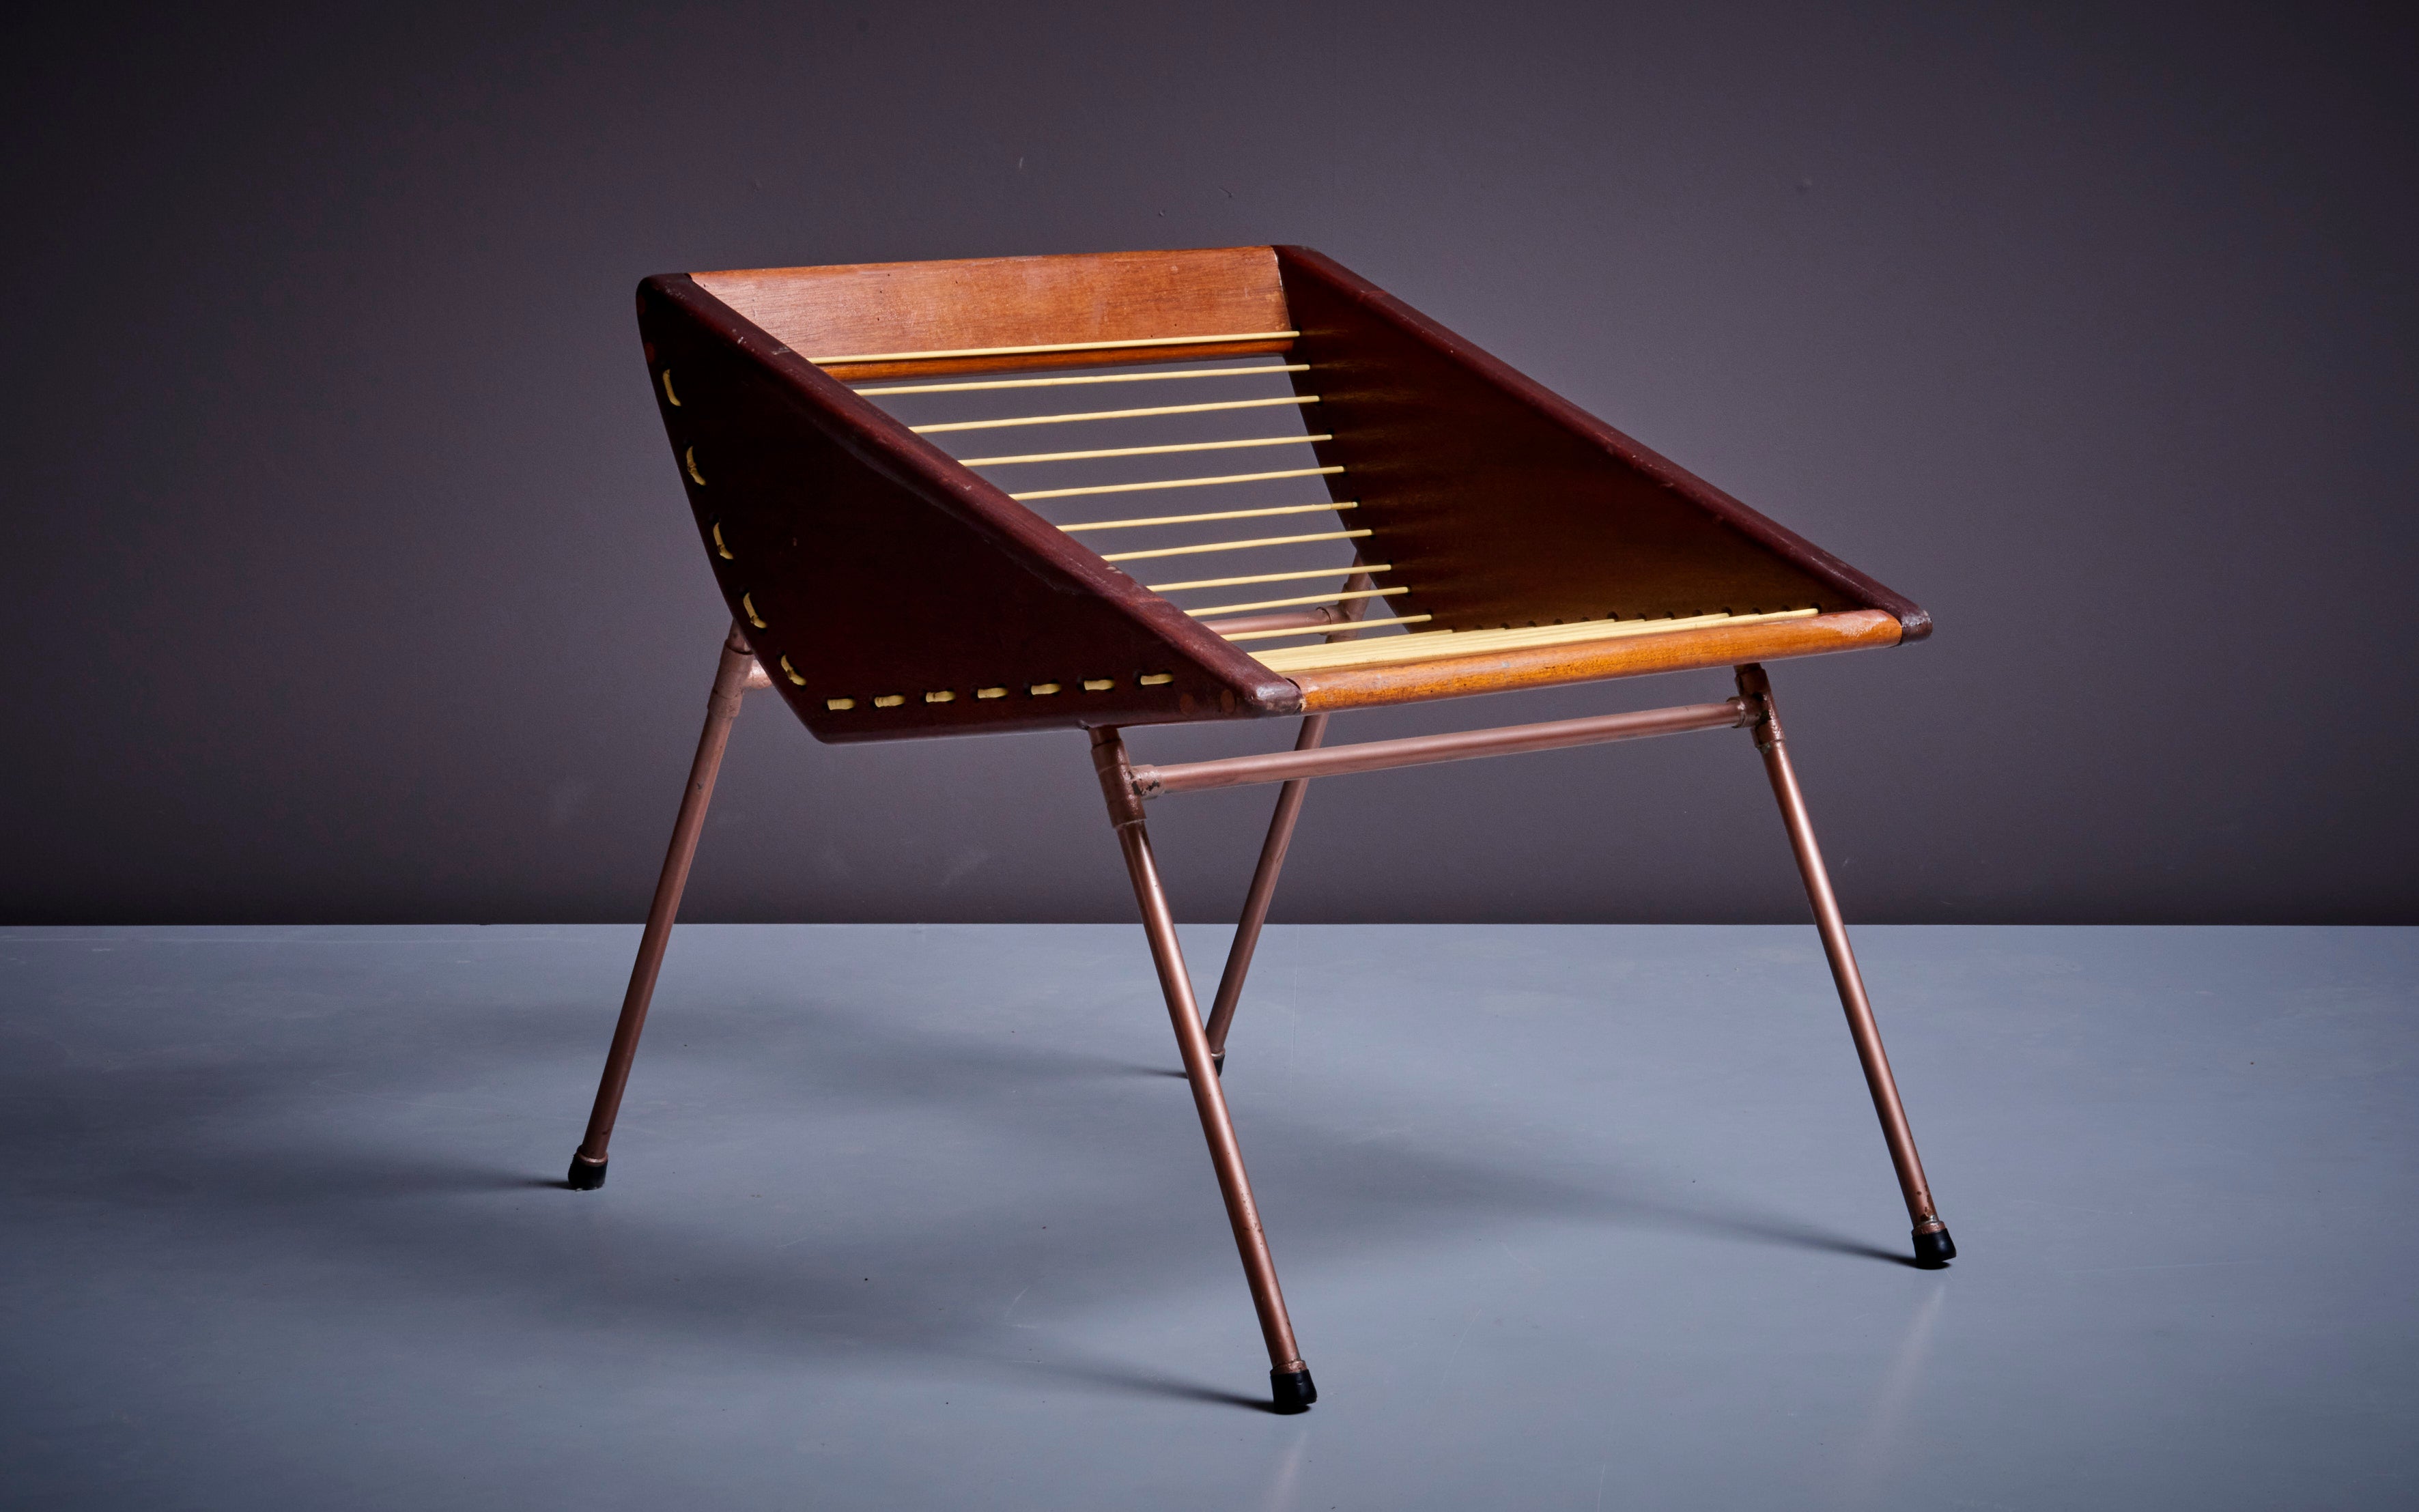 Unique DIY Studio Stool with copper pipes and webbing, USA, 1960s.